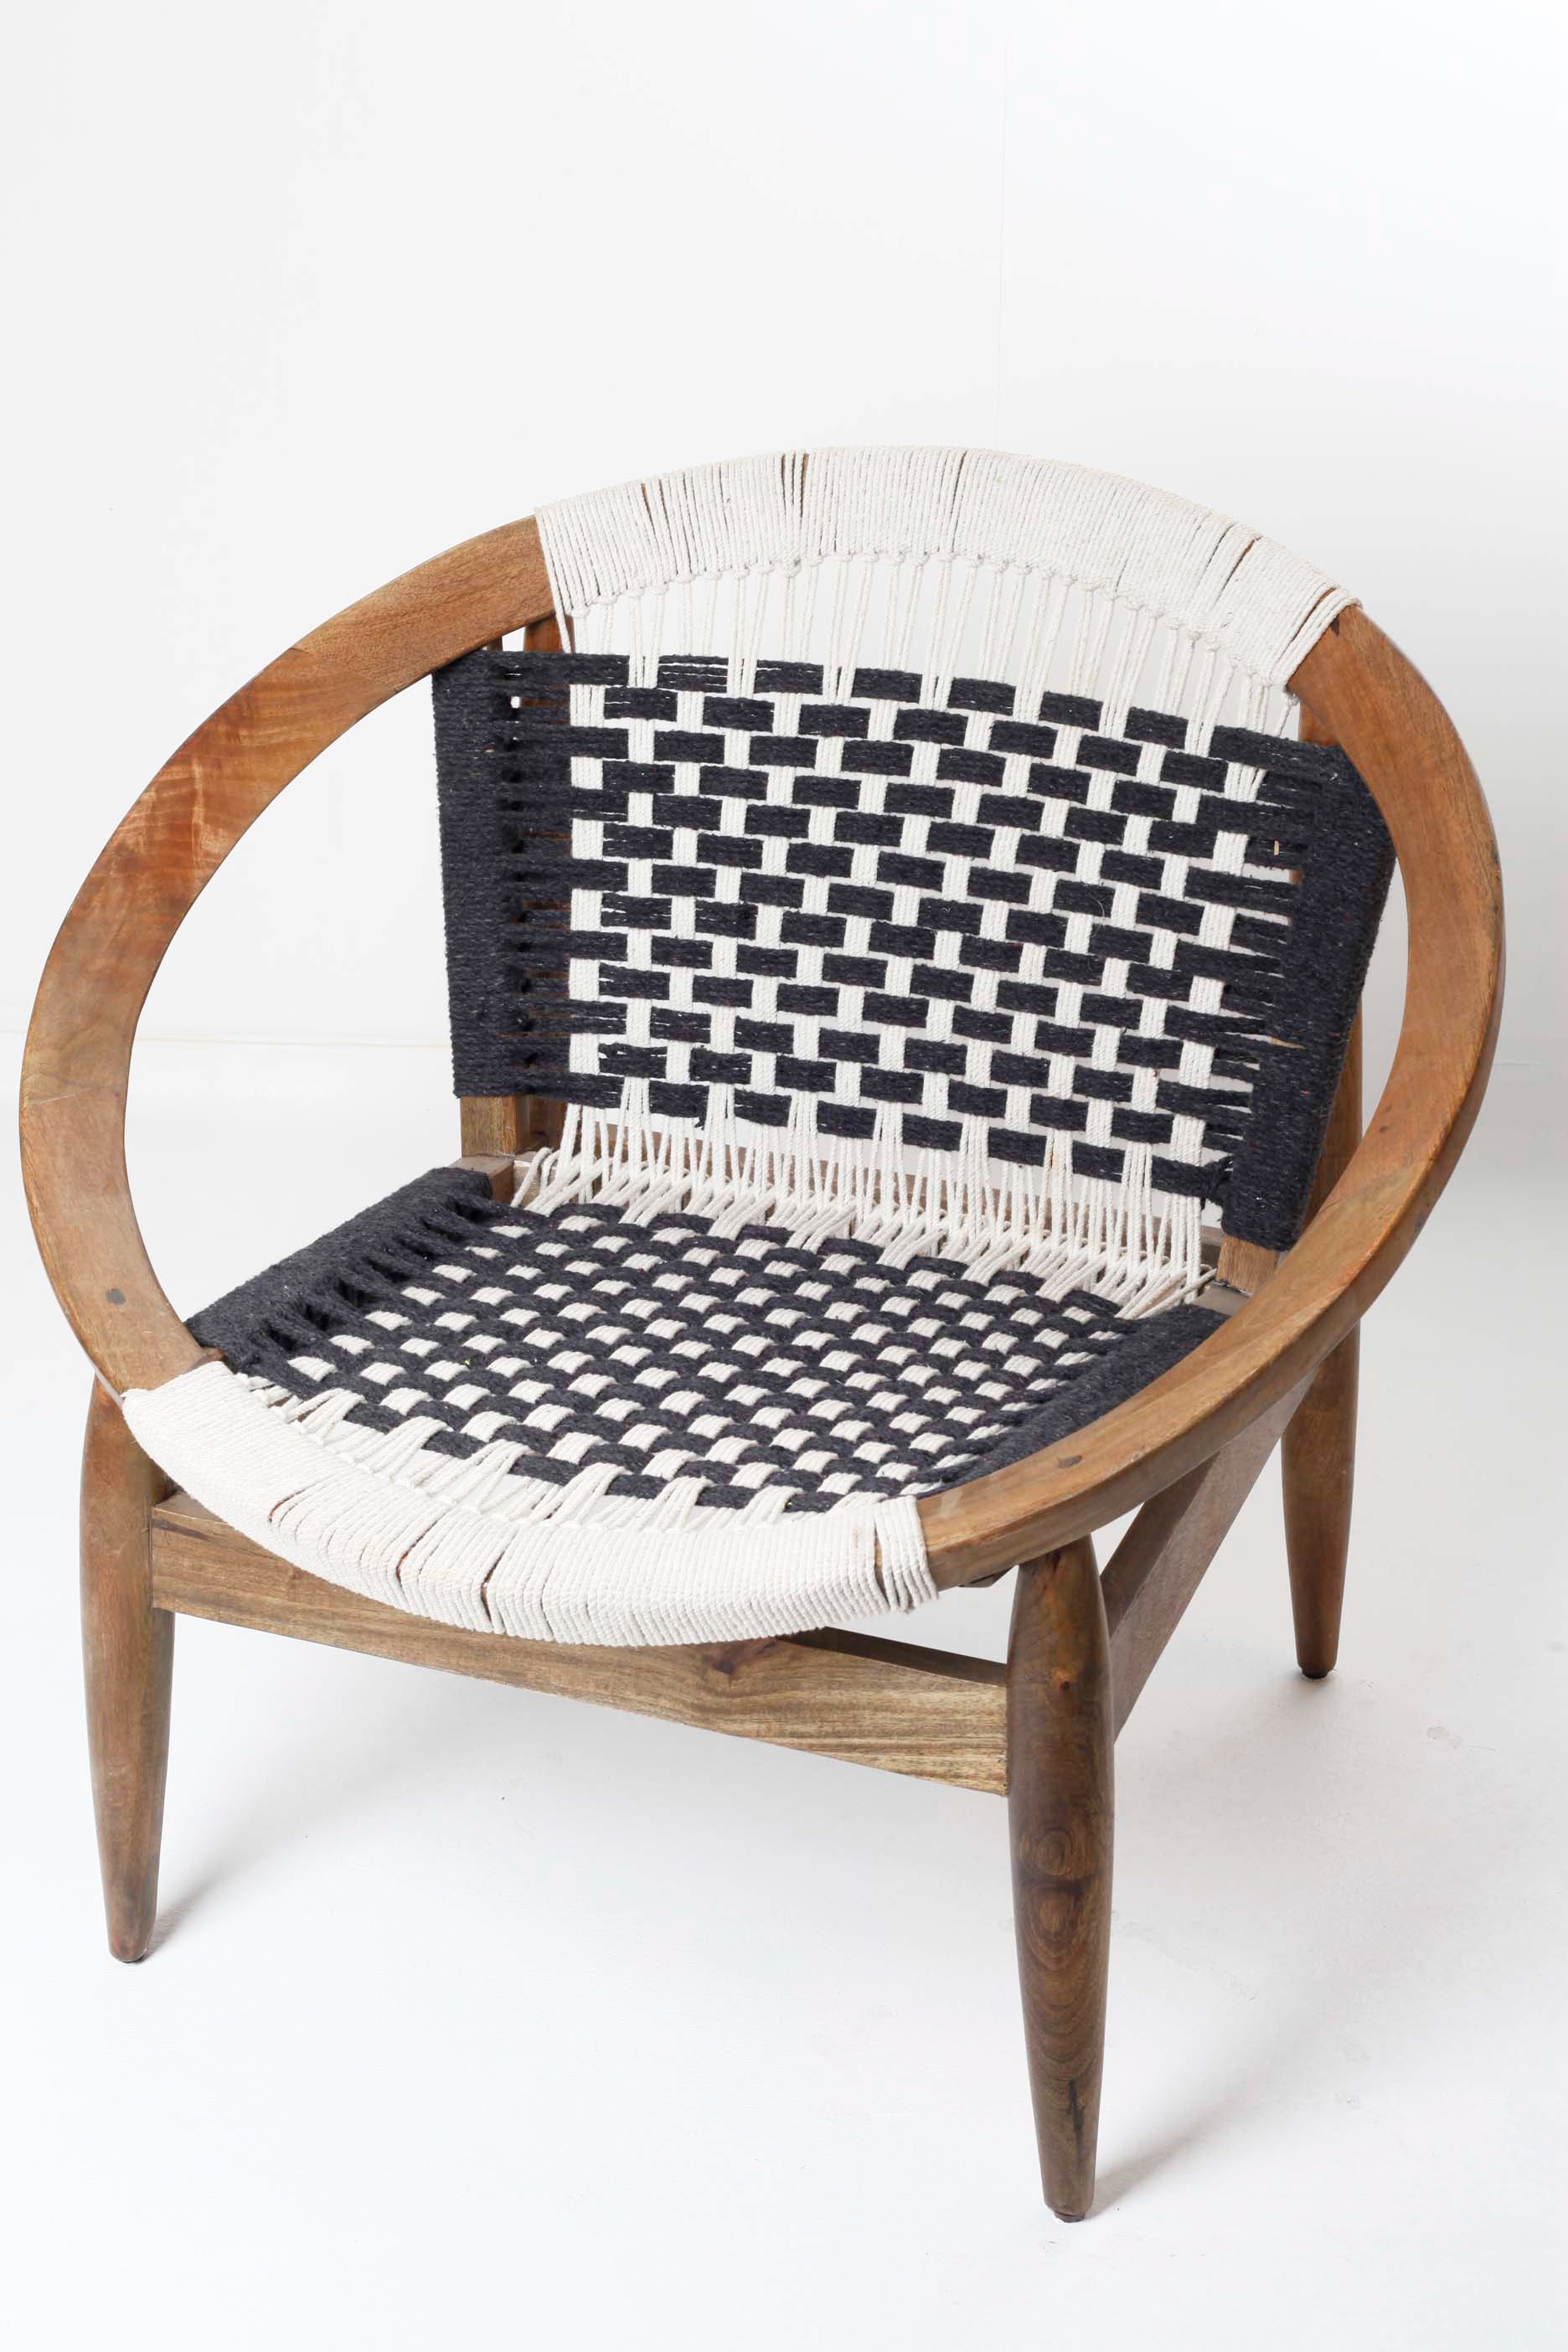 WOODEN BLACK & WHITE CROCHET BOHO LOUNGE CHAIR (2 pieces available)